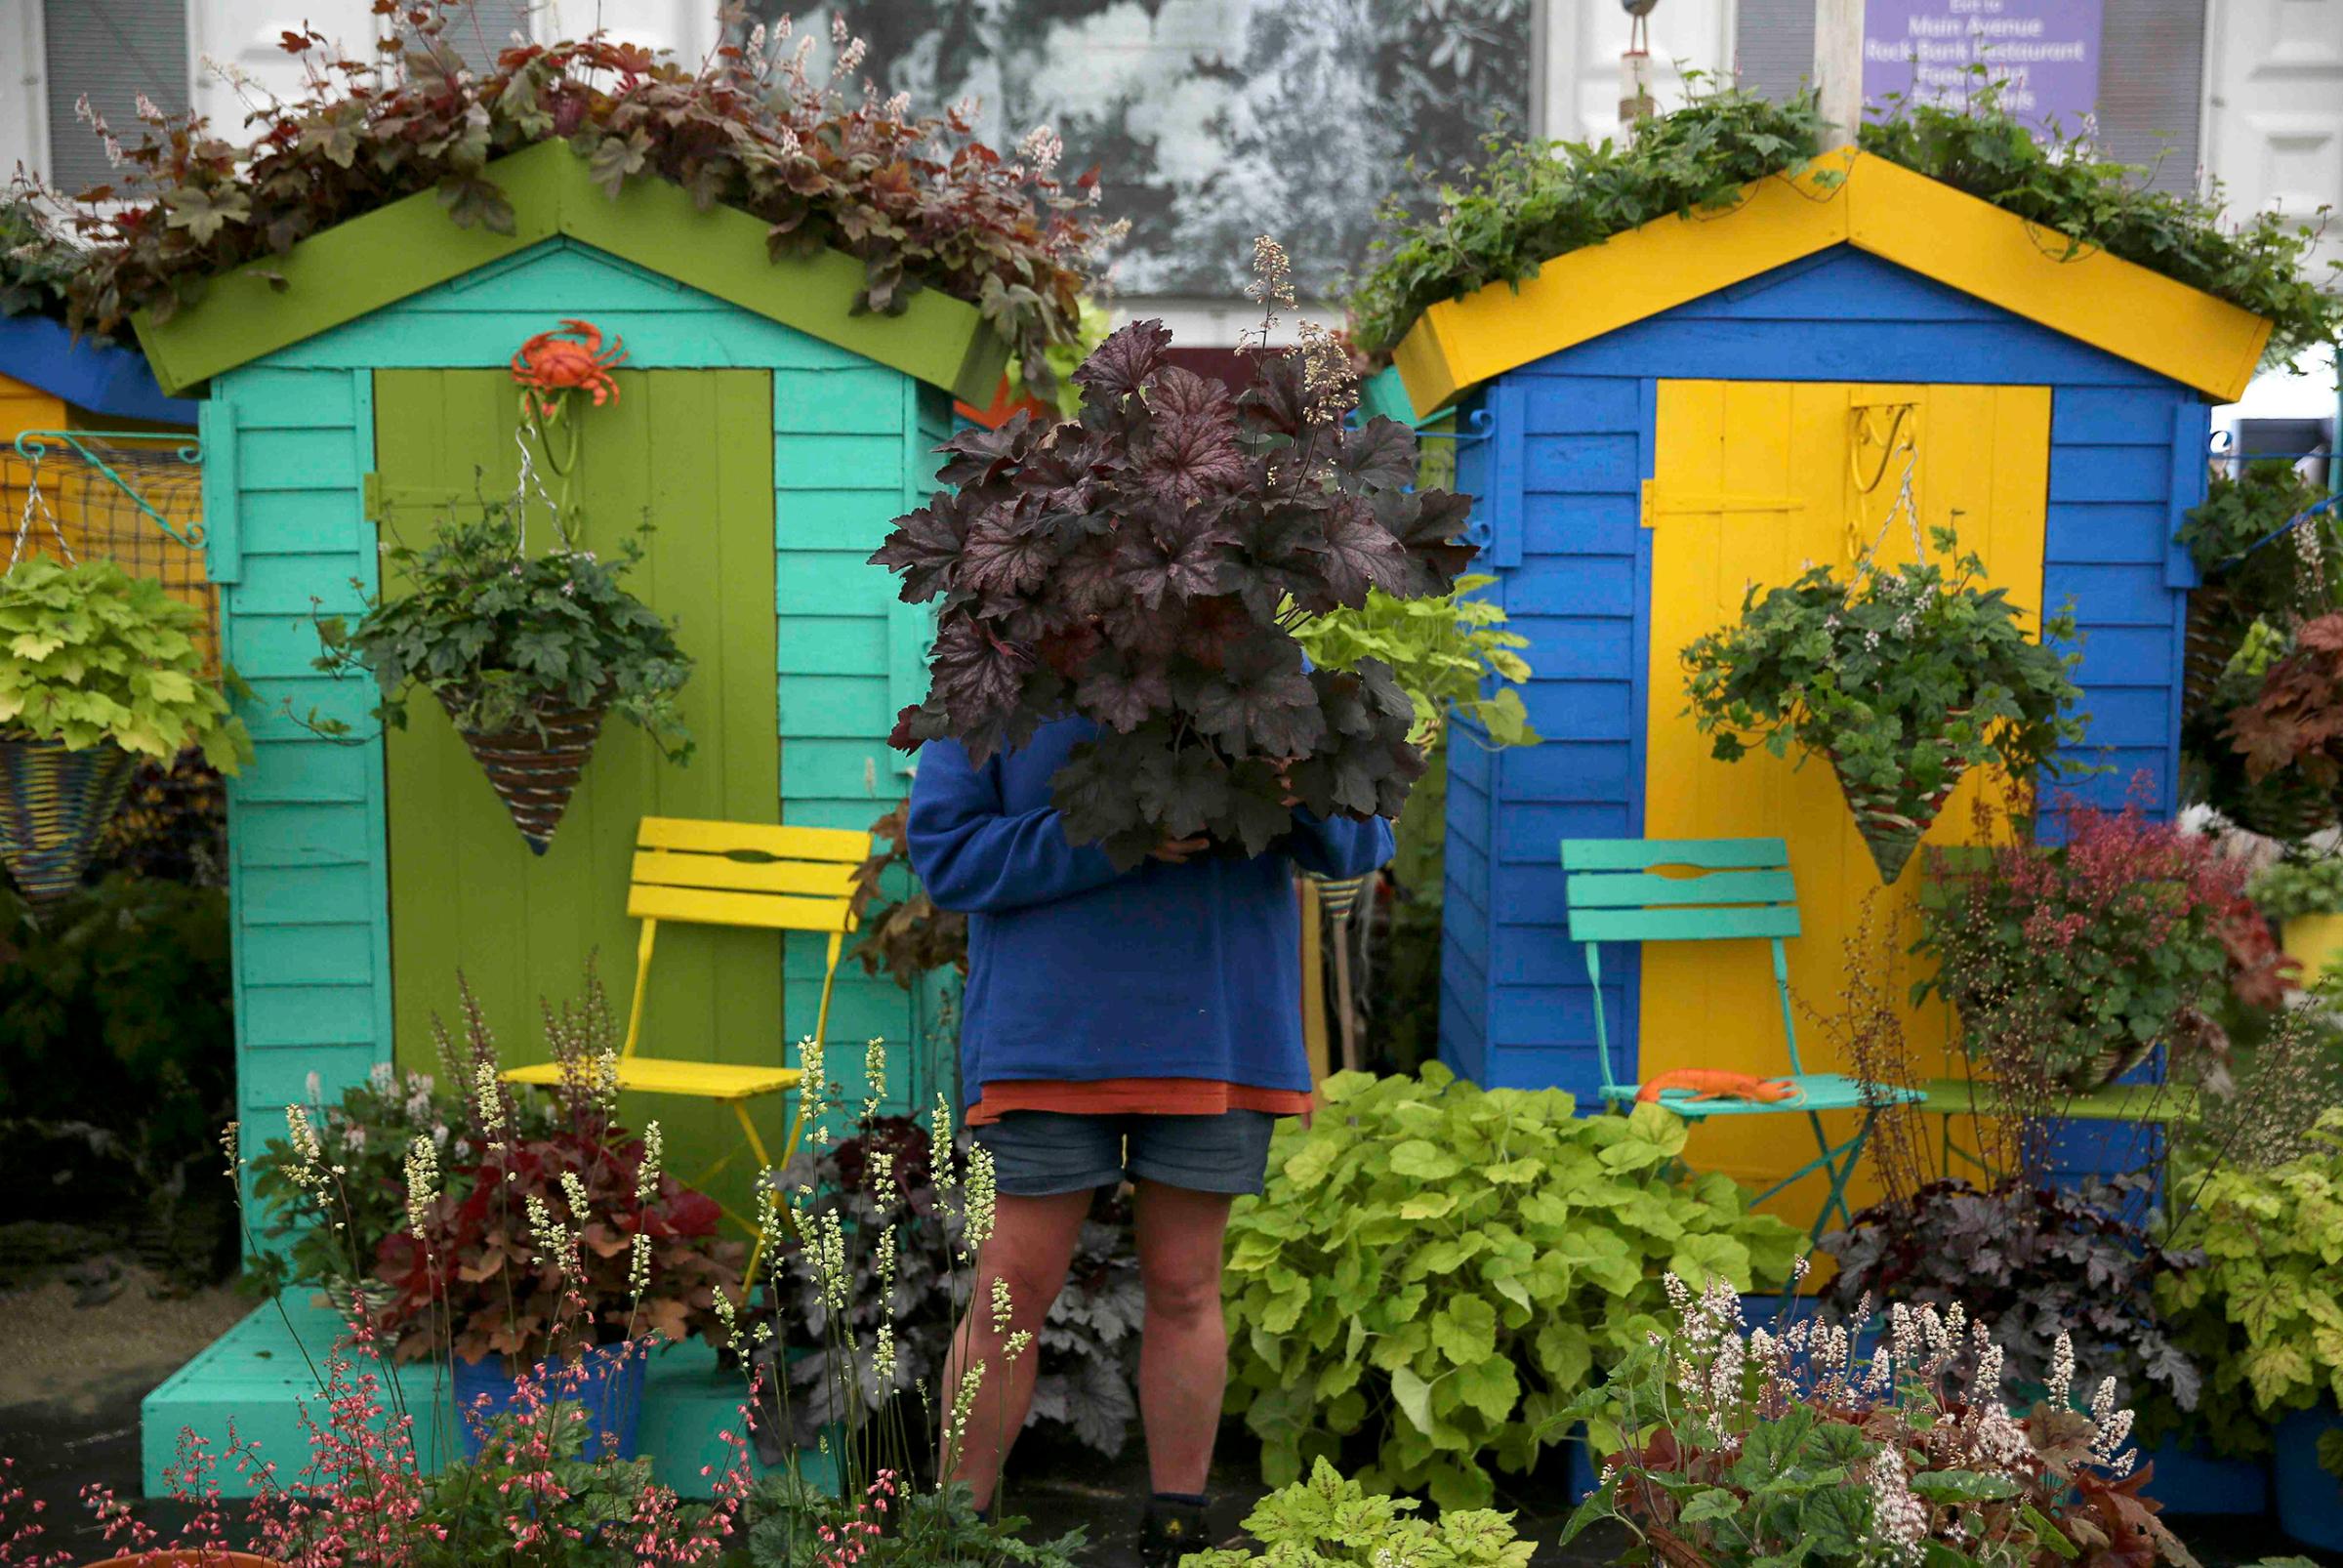 A woman works on a display during preparations for the RHS Chelsea Flower Show in London on May 21, 2016.